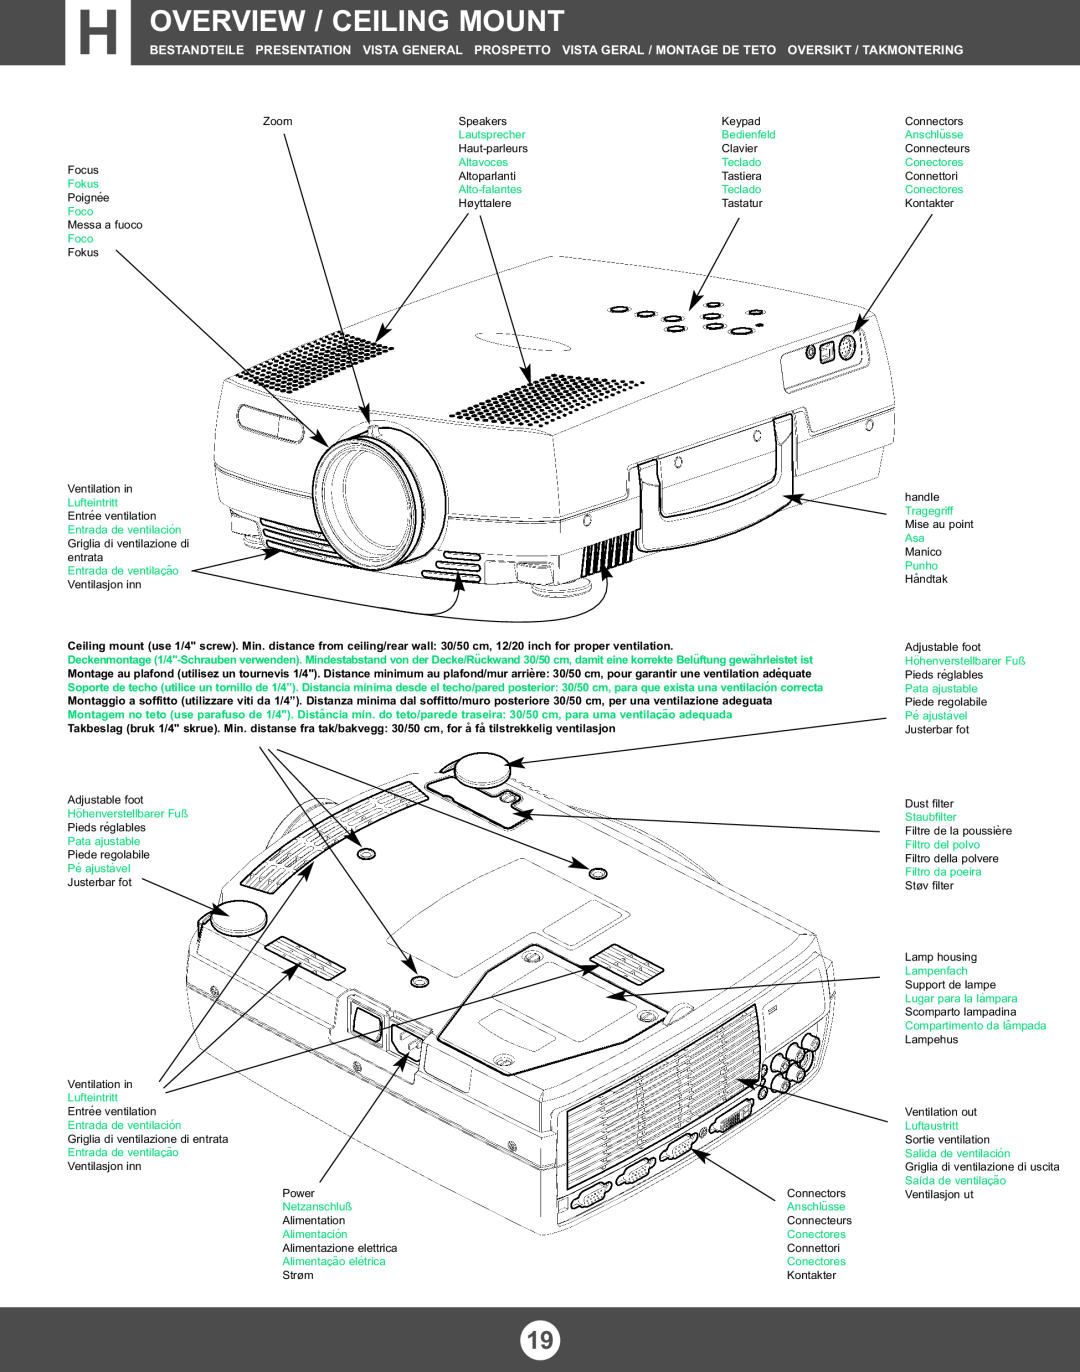 Proxima ASA 6150/6100 manual Overview / Ceiling Mount 